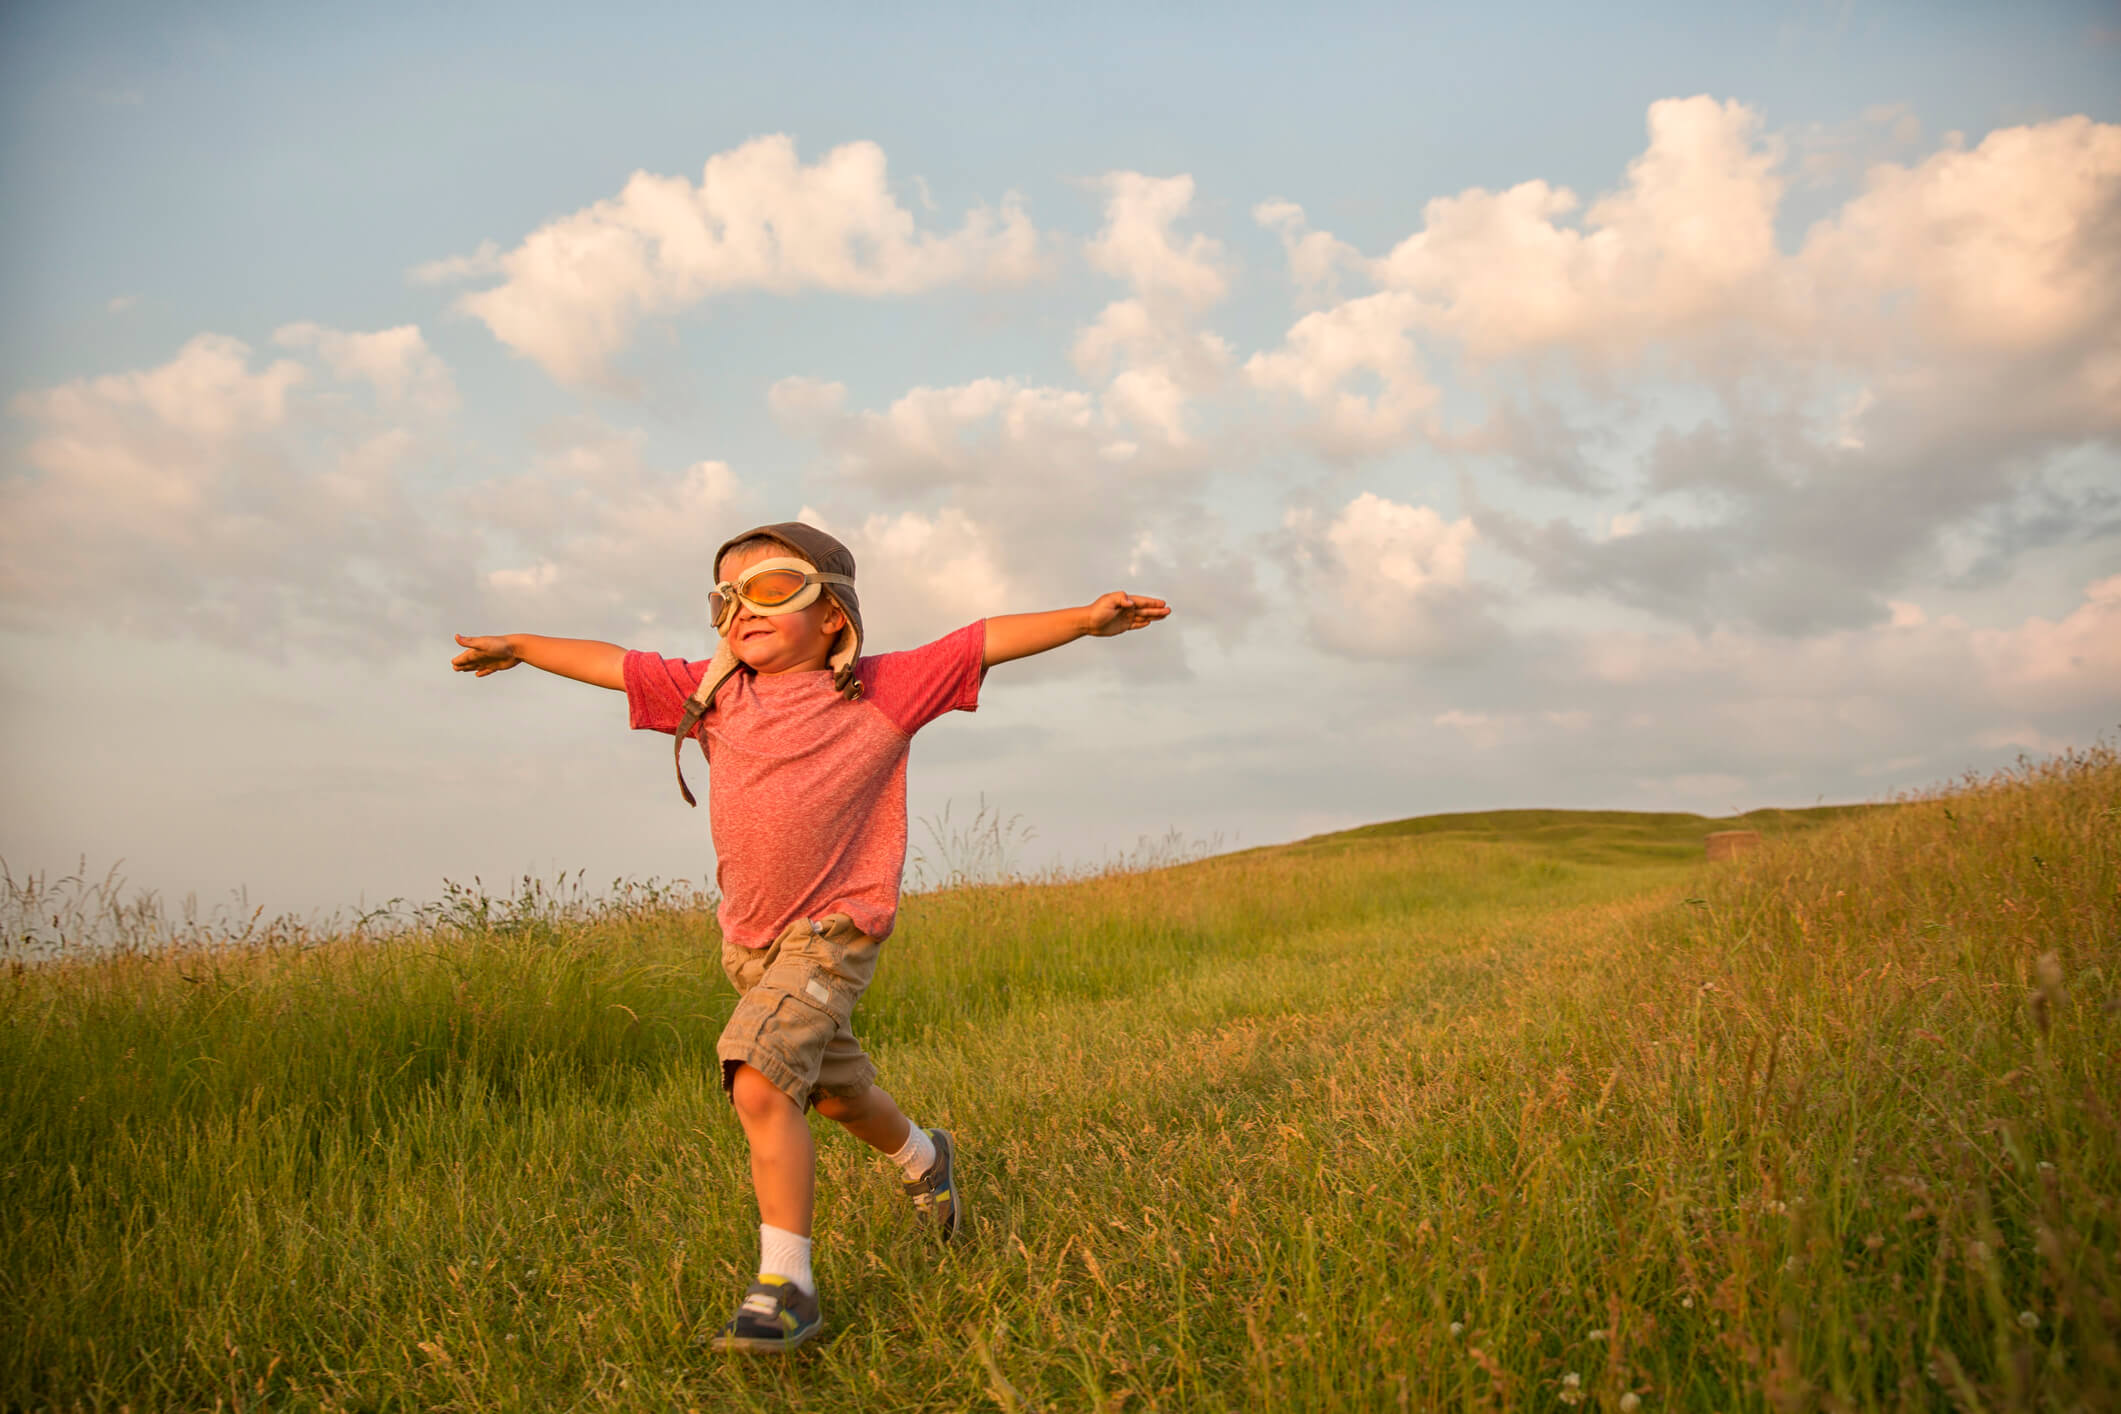 Young-English-Boy-Imagines-Flying-on-Hill-481258993_2125x1416.jpeg